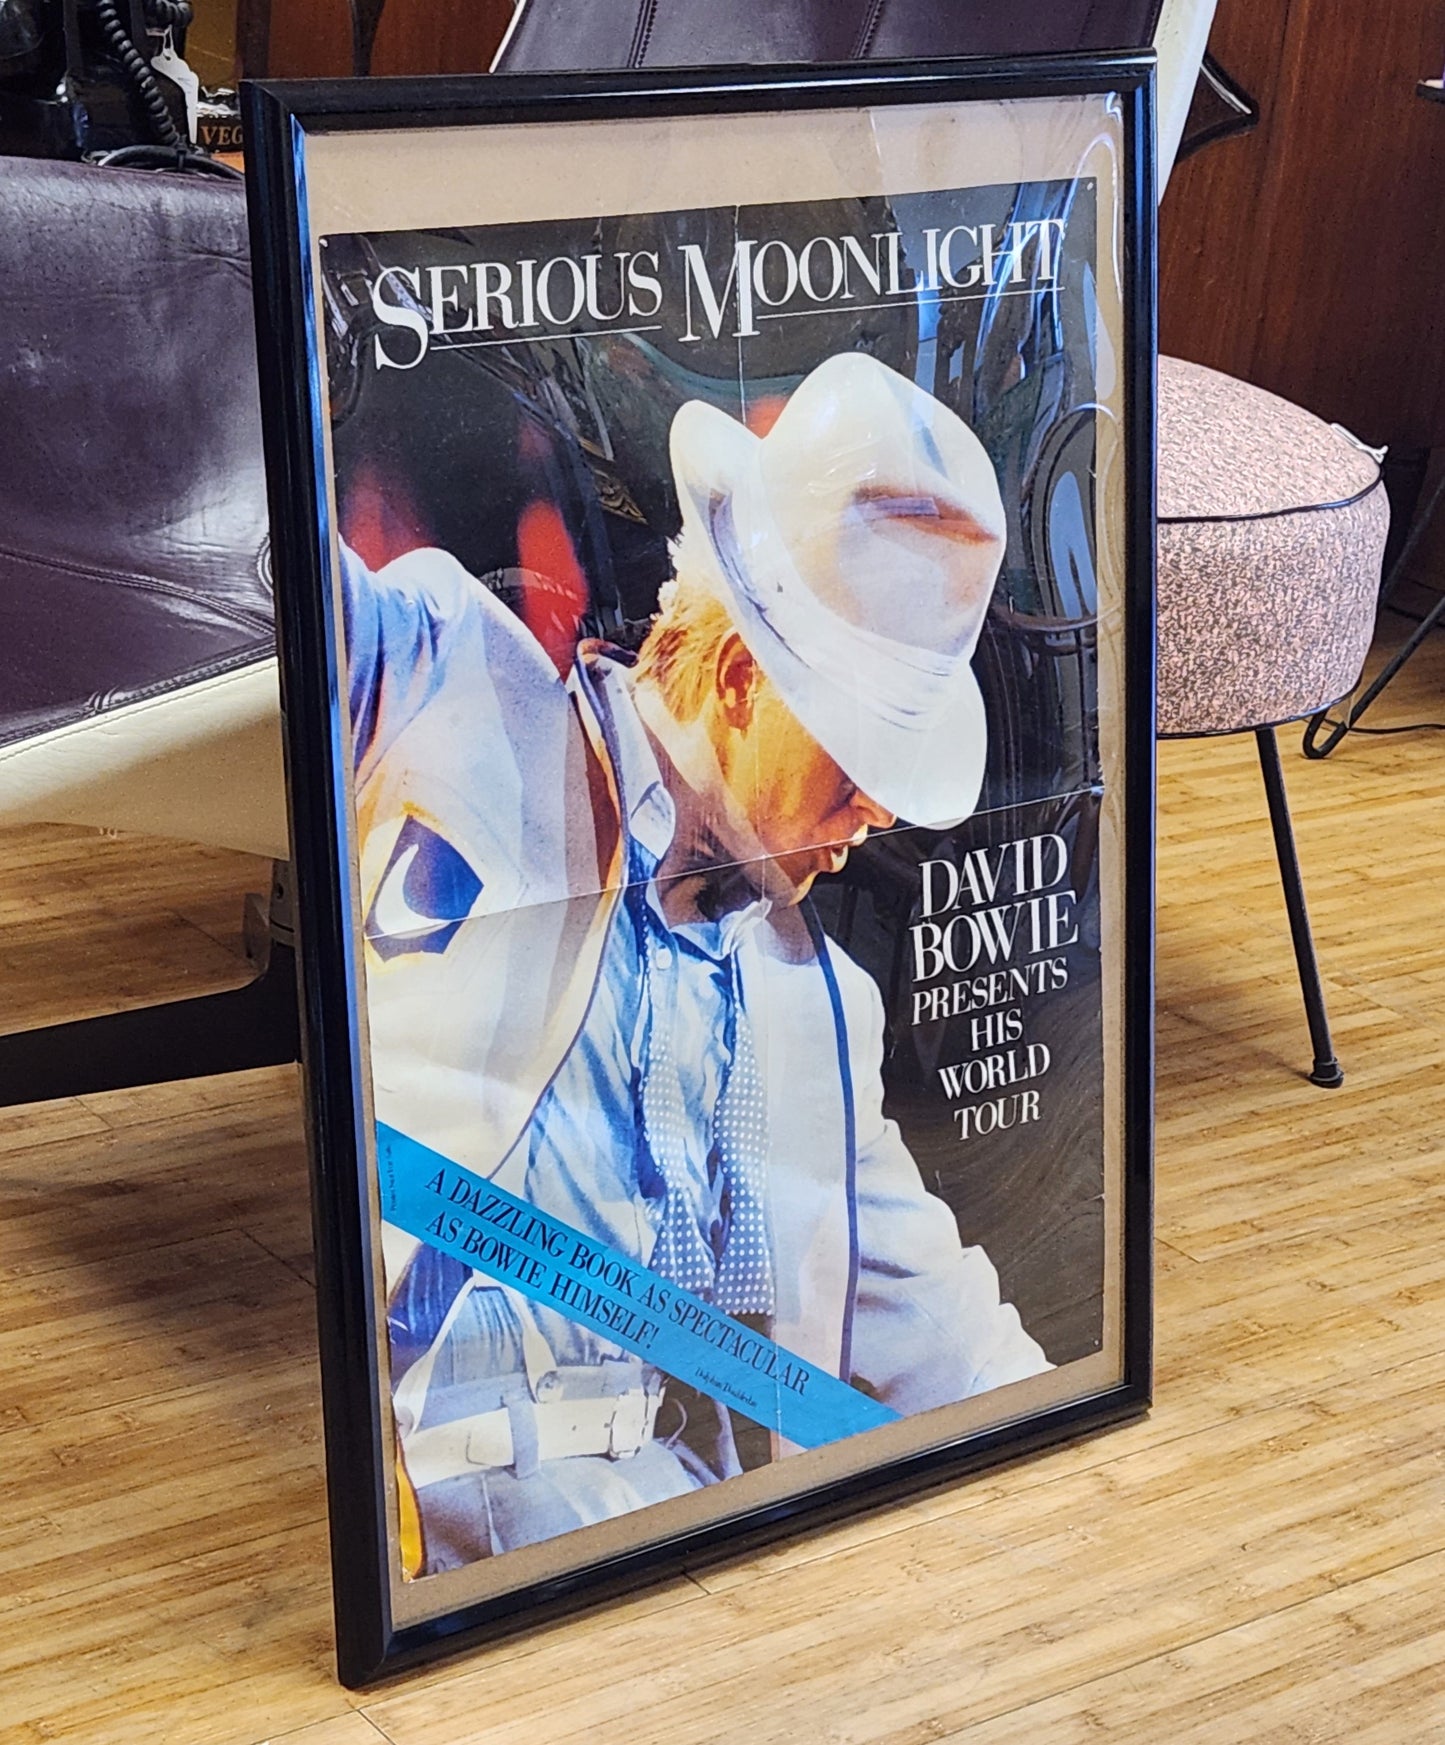 1980's David Bowie "Serious Moonlight" Promo Poster